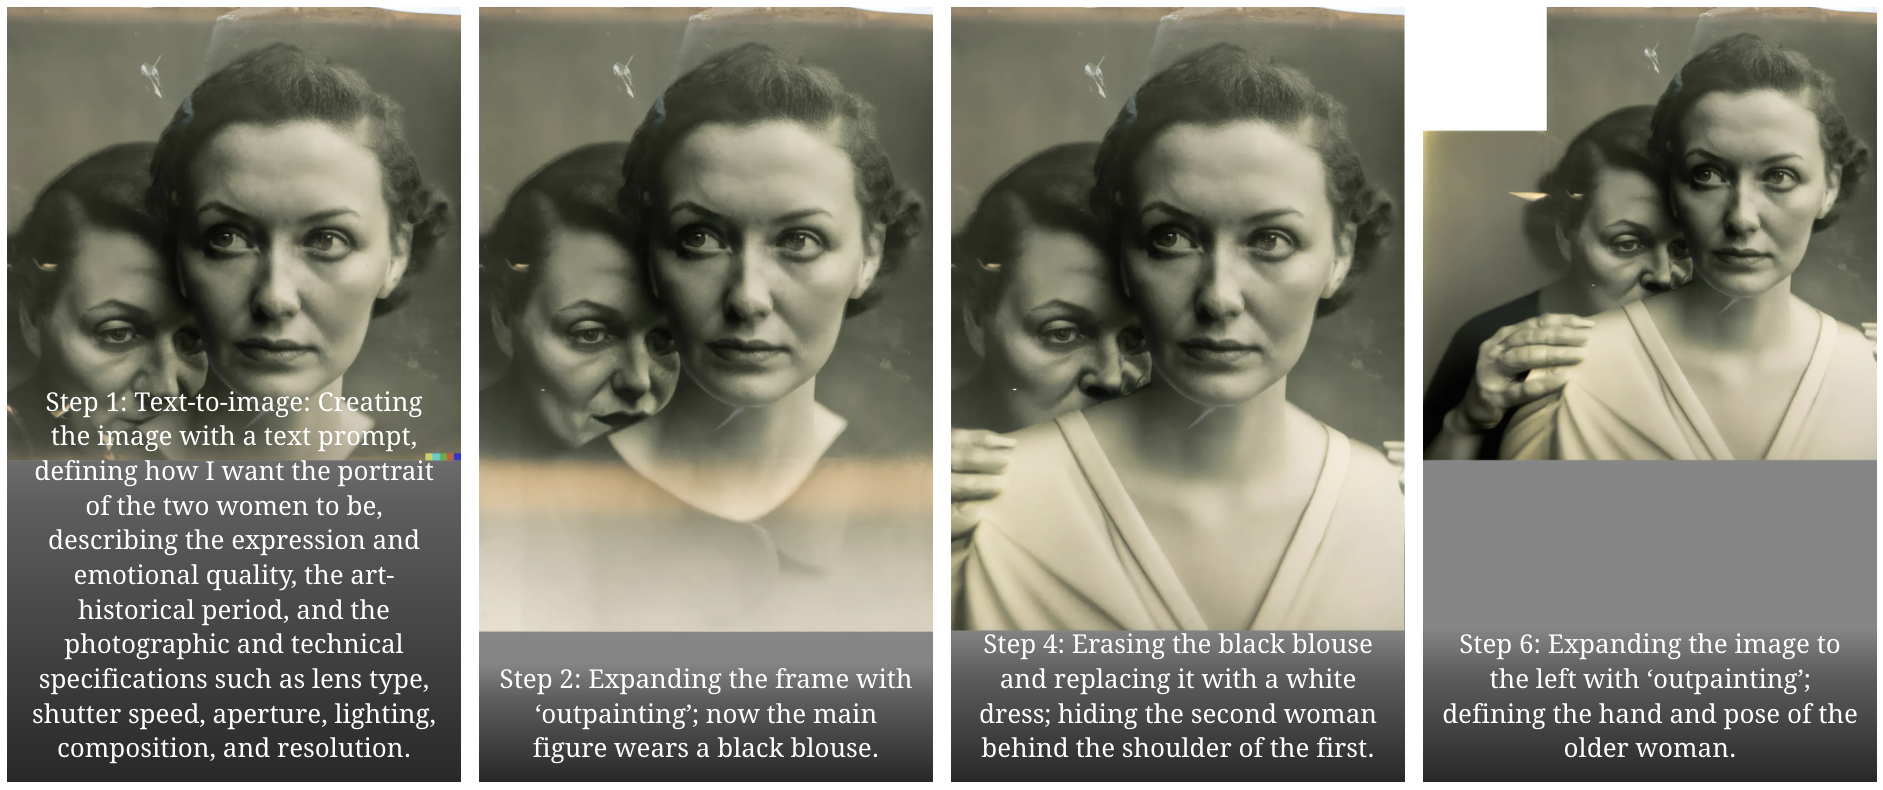 A series of 4 vintage looking photographs of two women, with descriptions of the process of prompting 